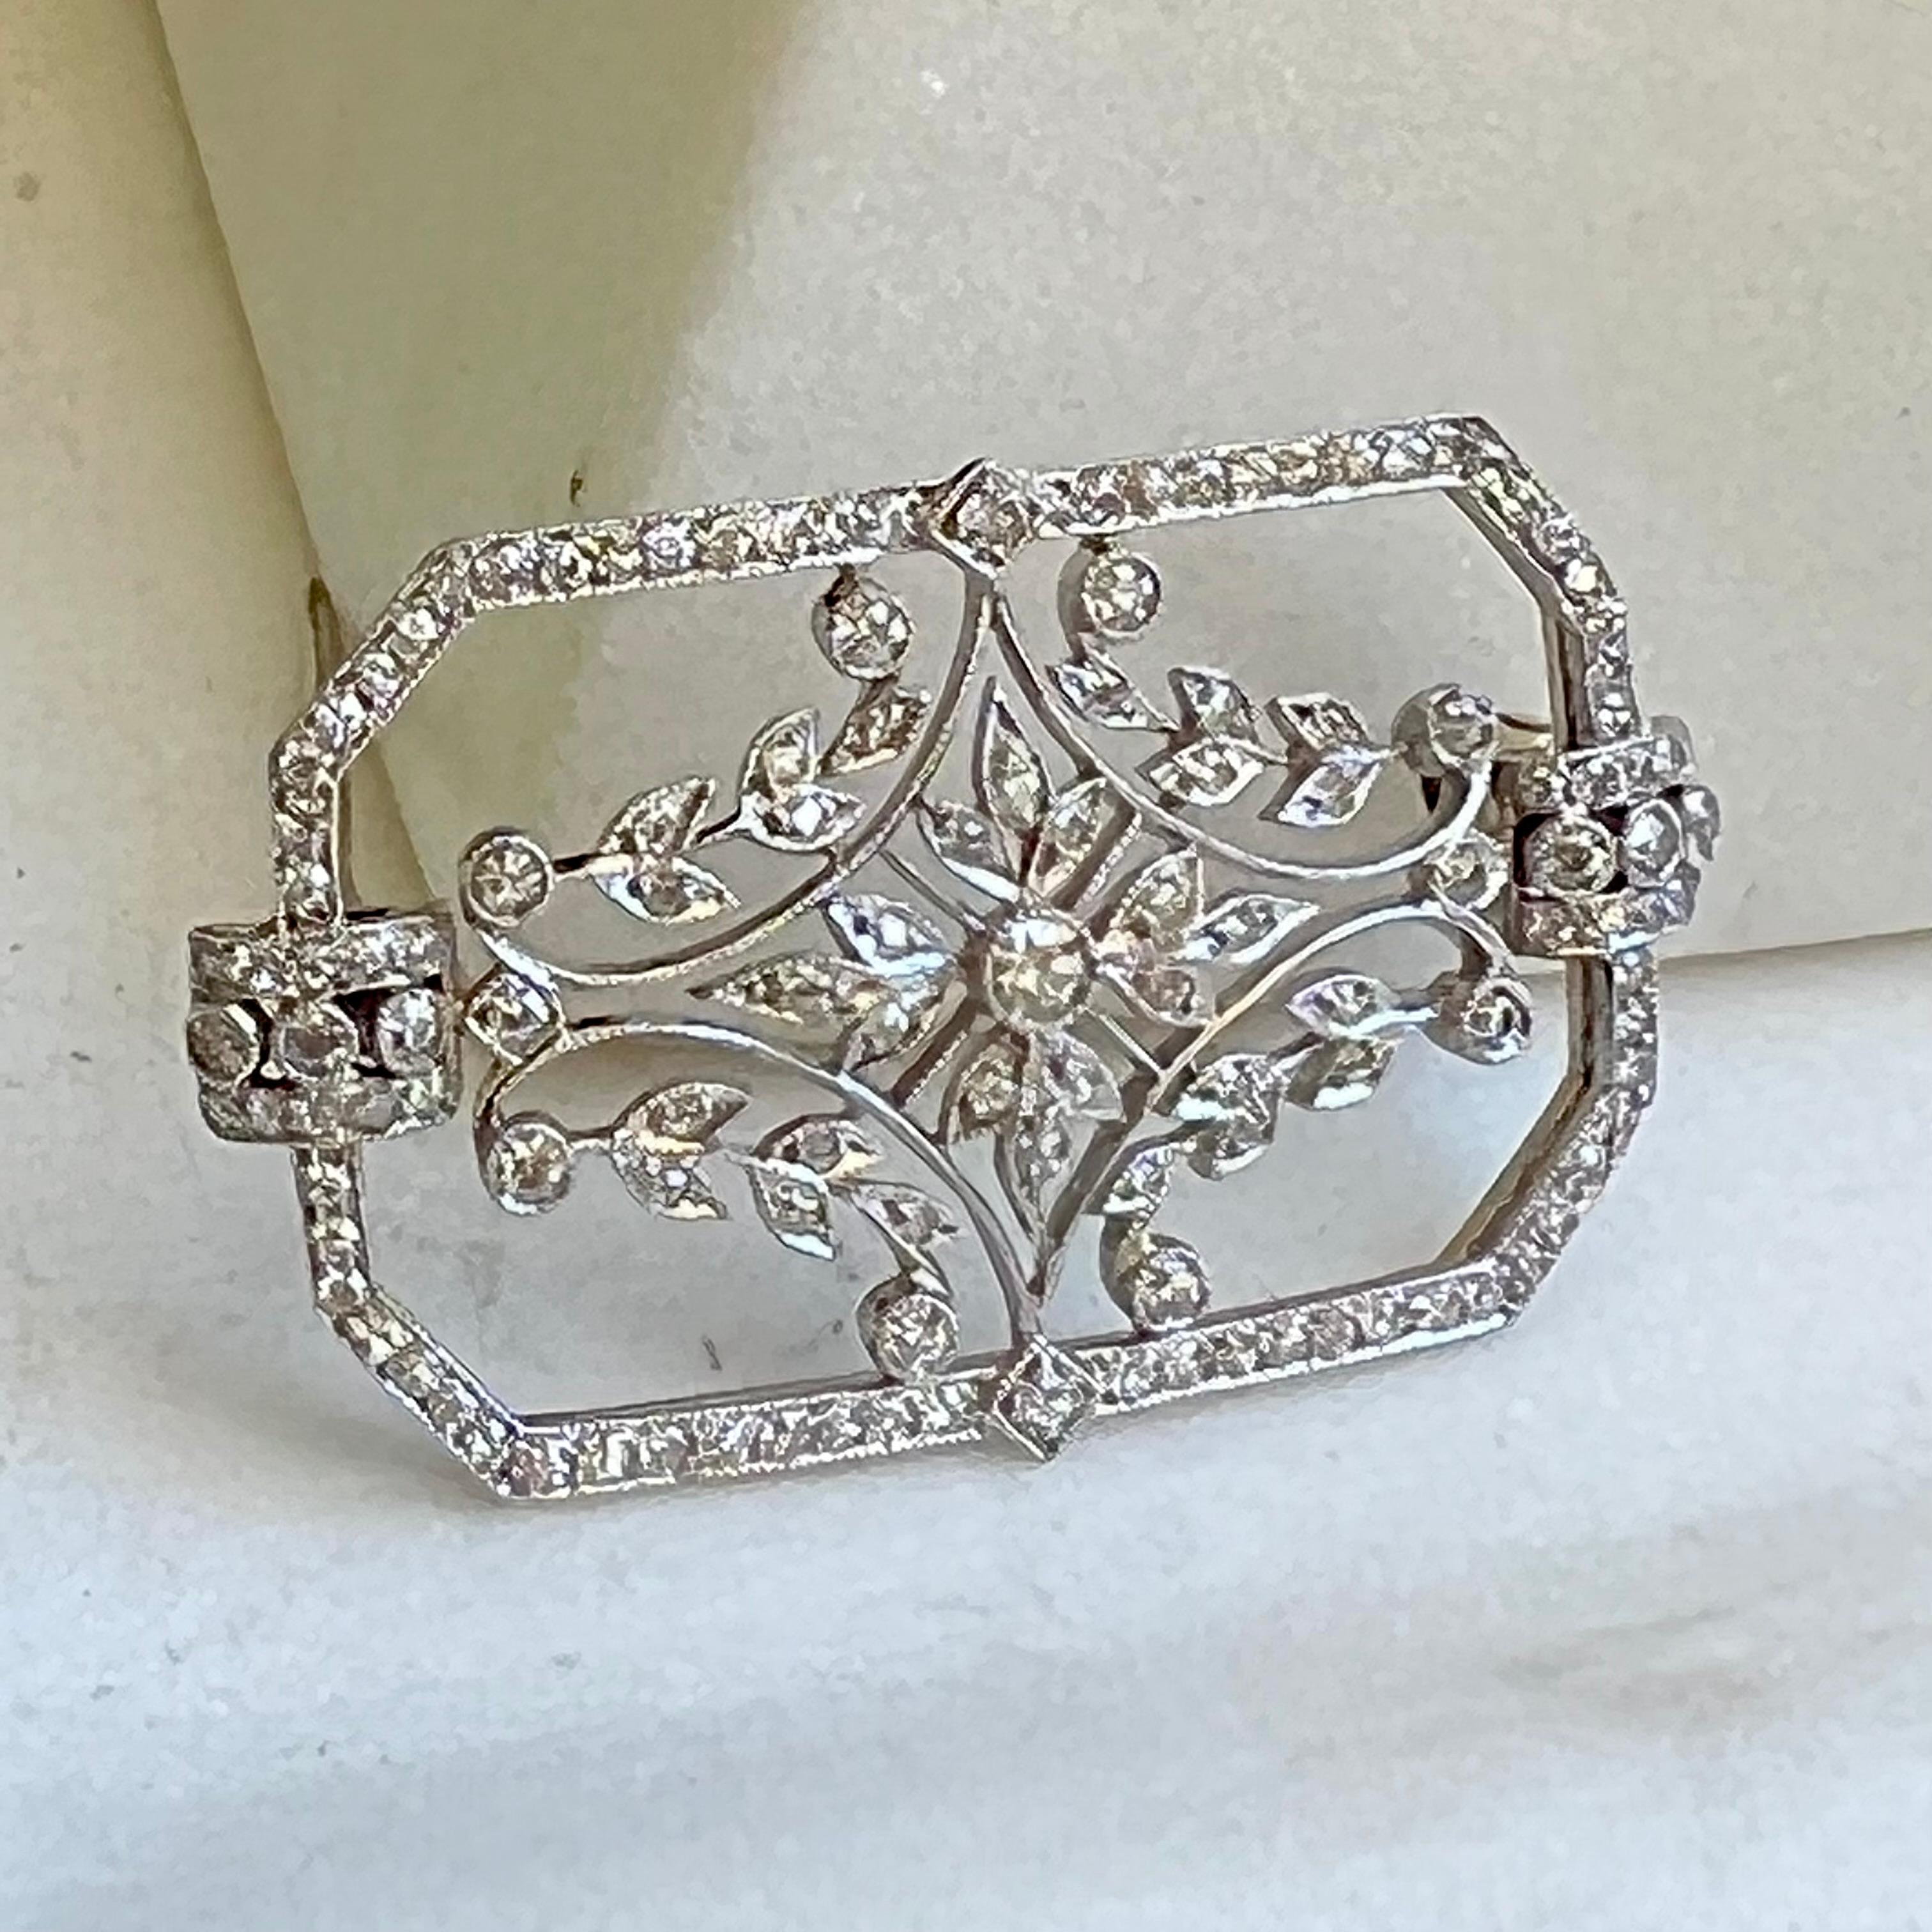 This stunning Diamond and platinum brooch  has 127  bright white diamonds ( total weight approximately 1.05 carats). The rectangle design is open filigree with a multitude of inlayed diamonds that sparkle and dance in the light. This brooch from the